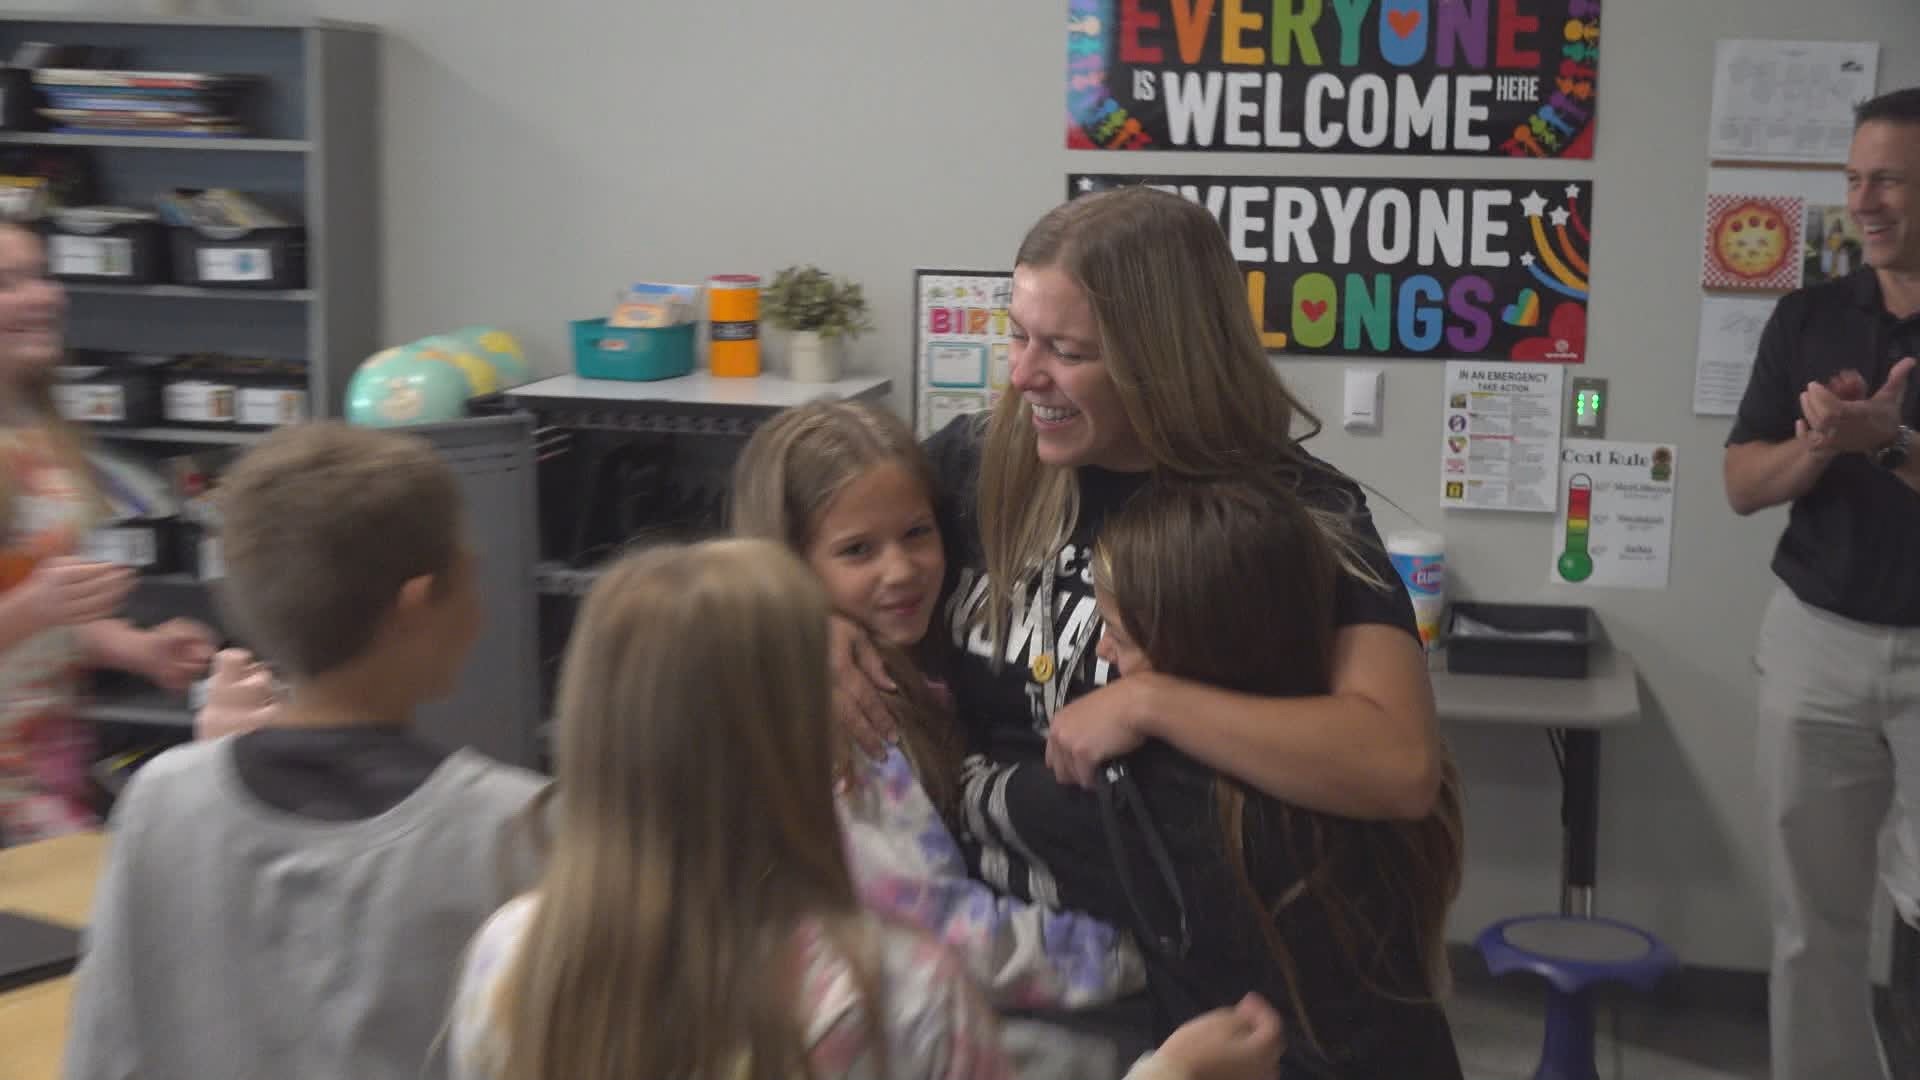 Our very first Teacher of the Week surprise for the 2023-24 school year was an emotional one. Just days into the school year, she was overwhelmed by the support.